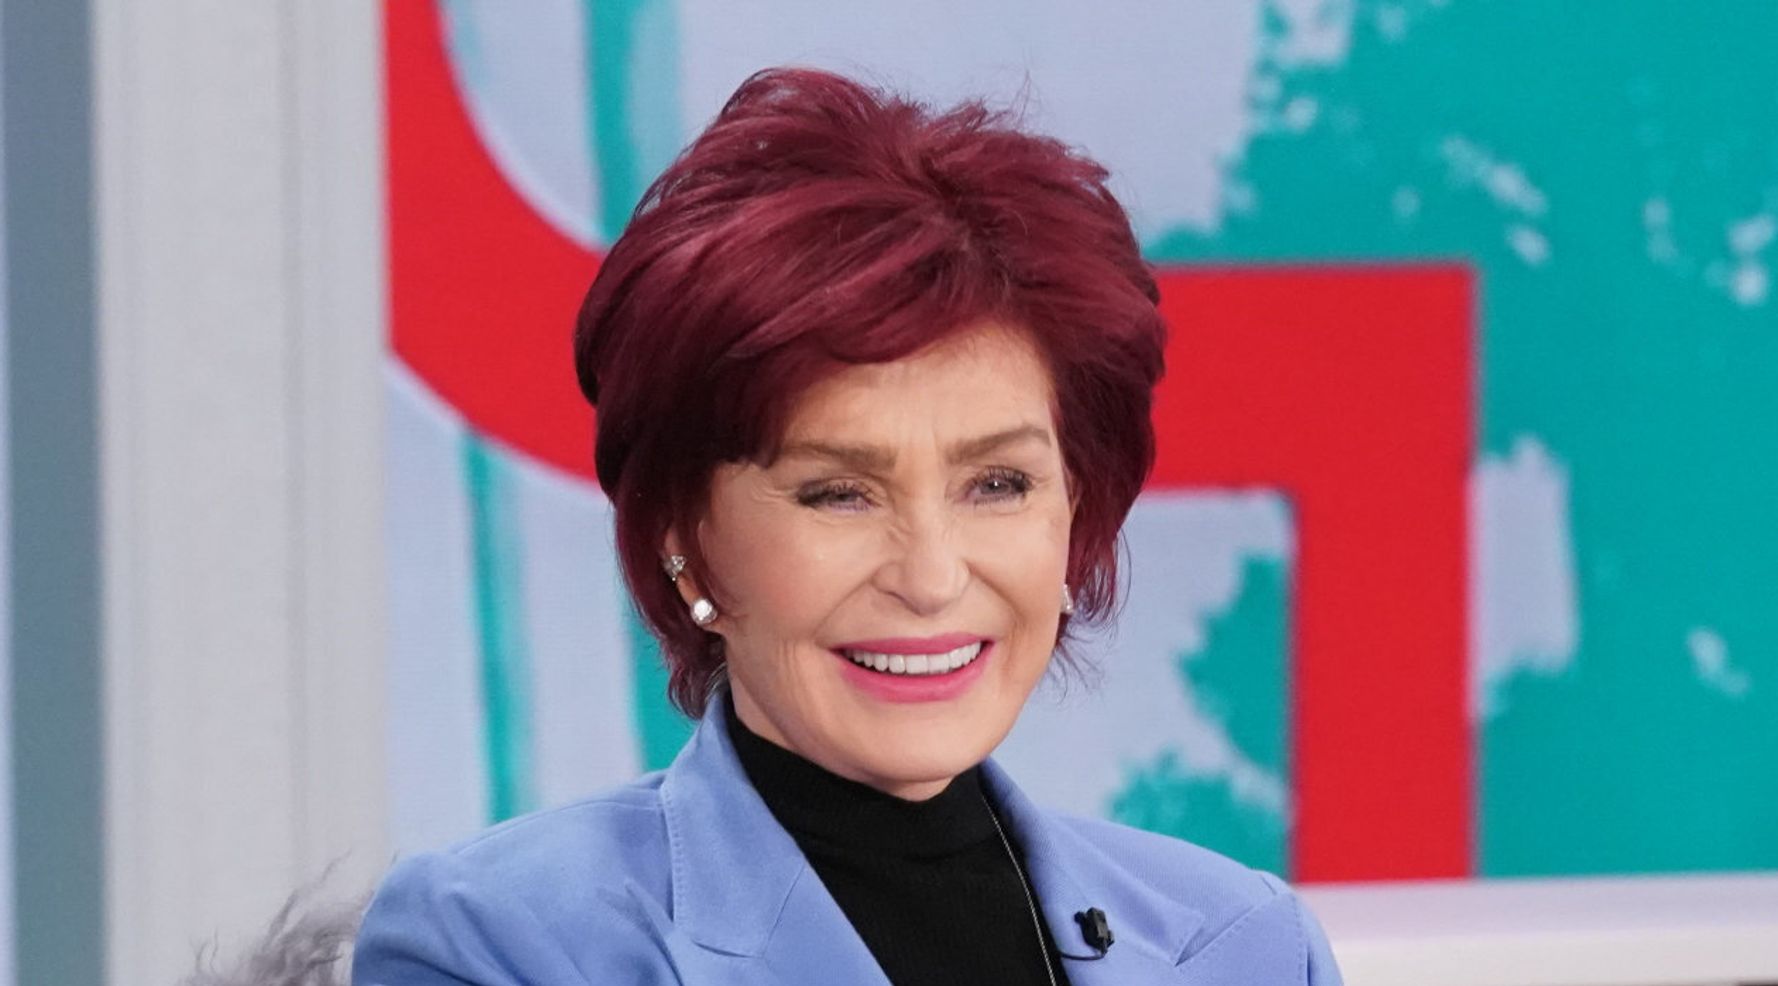 Sharon Osbourne is dragged in for defending Piers Morgan against racism claims